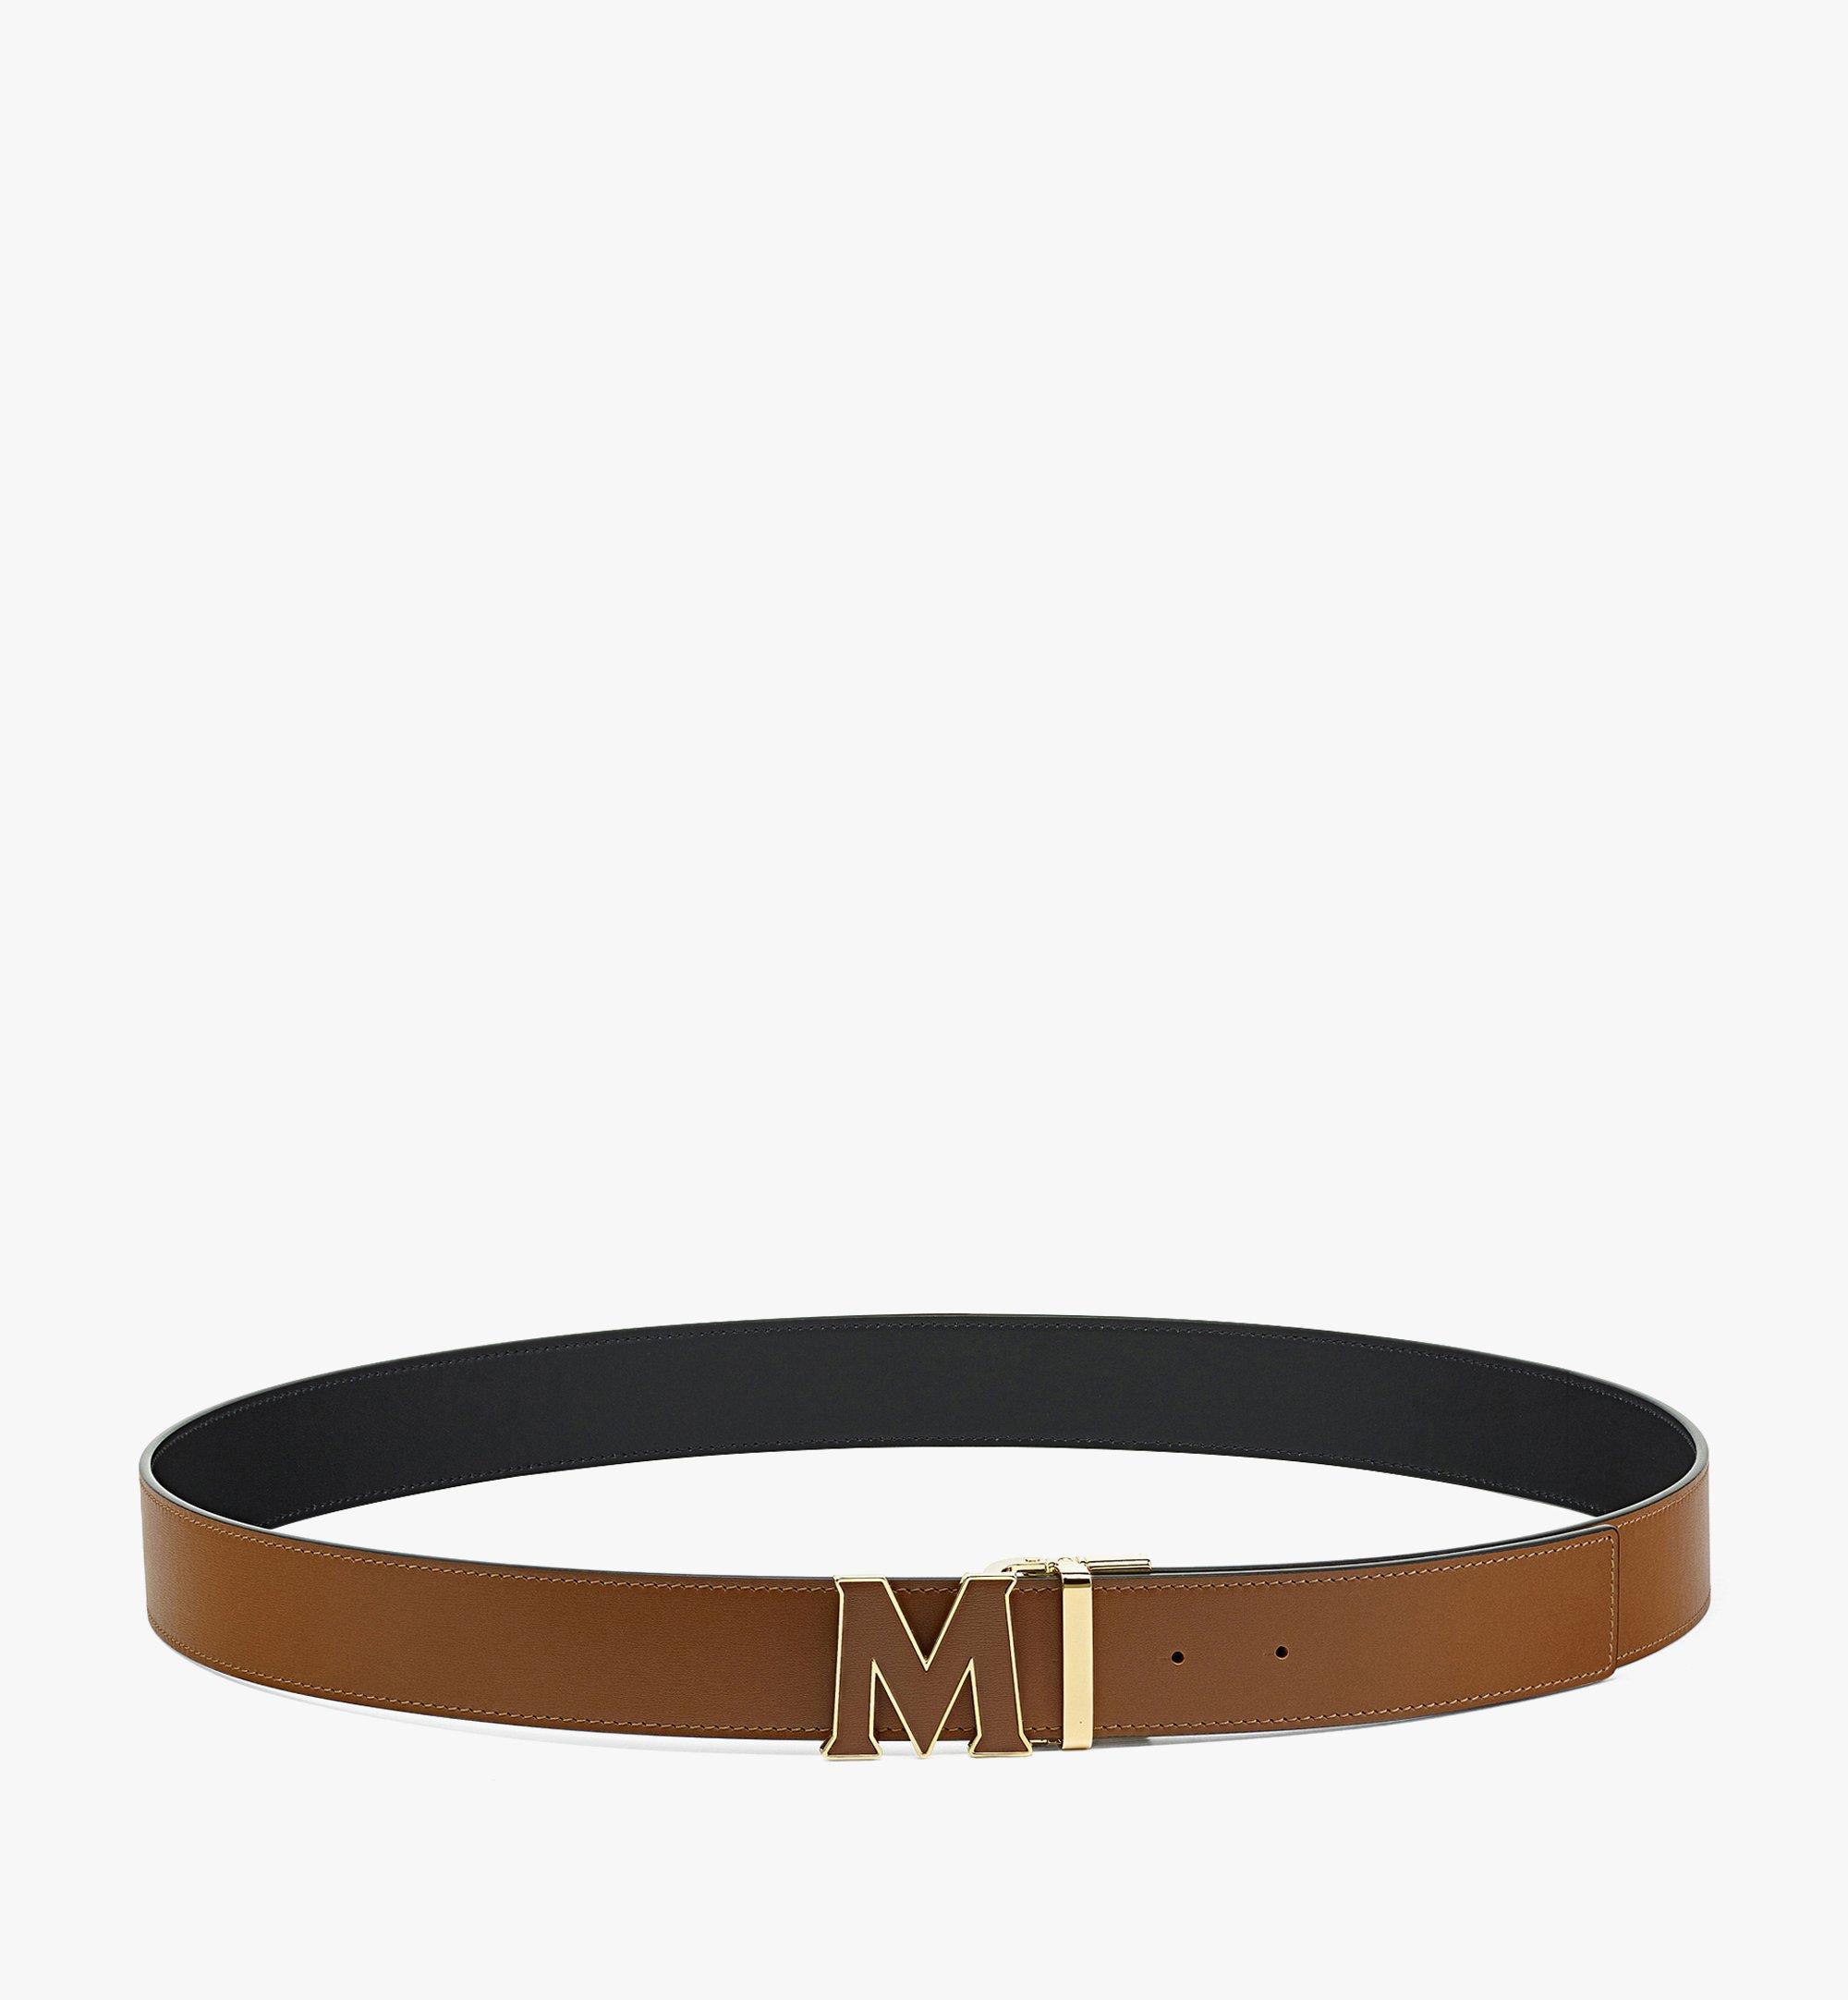 MCM Claus Leather Inlay M Reversible Belt 1.5” in Embossed Leather Brown MXBCSVI03N7001 Alternate View 2